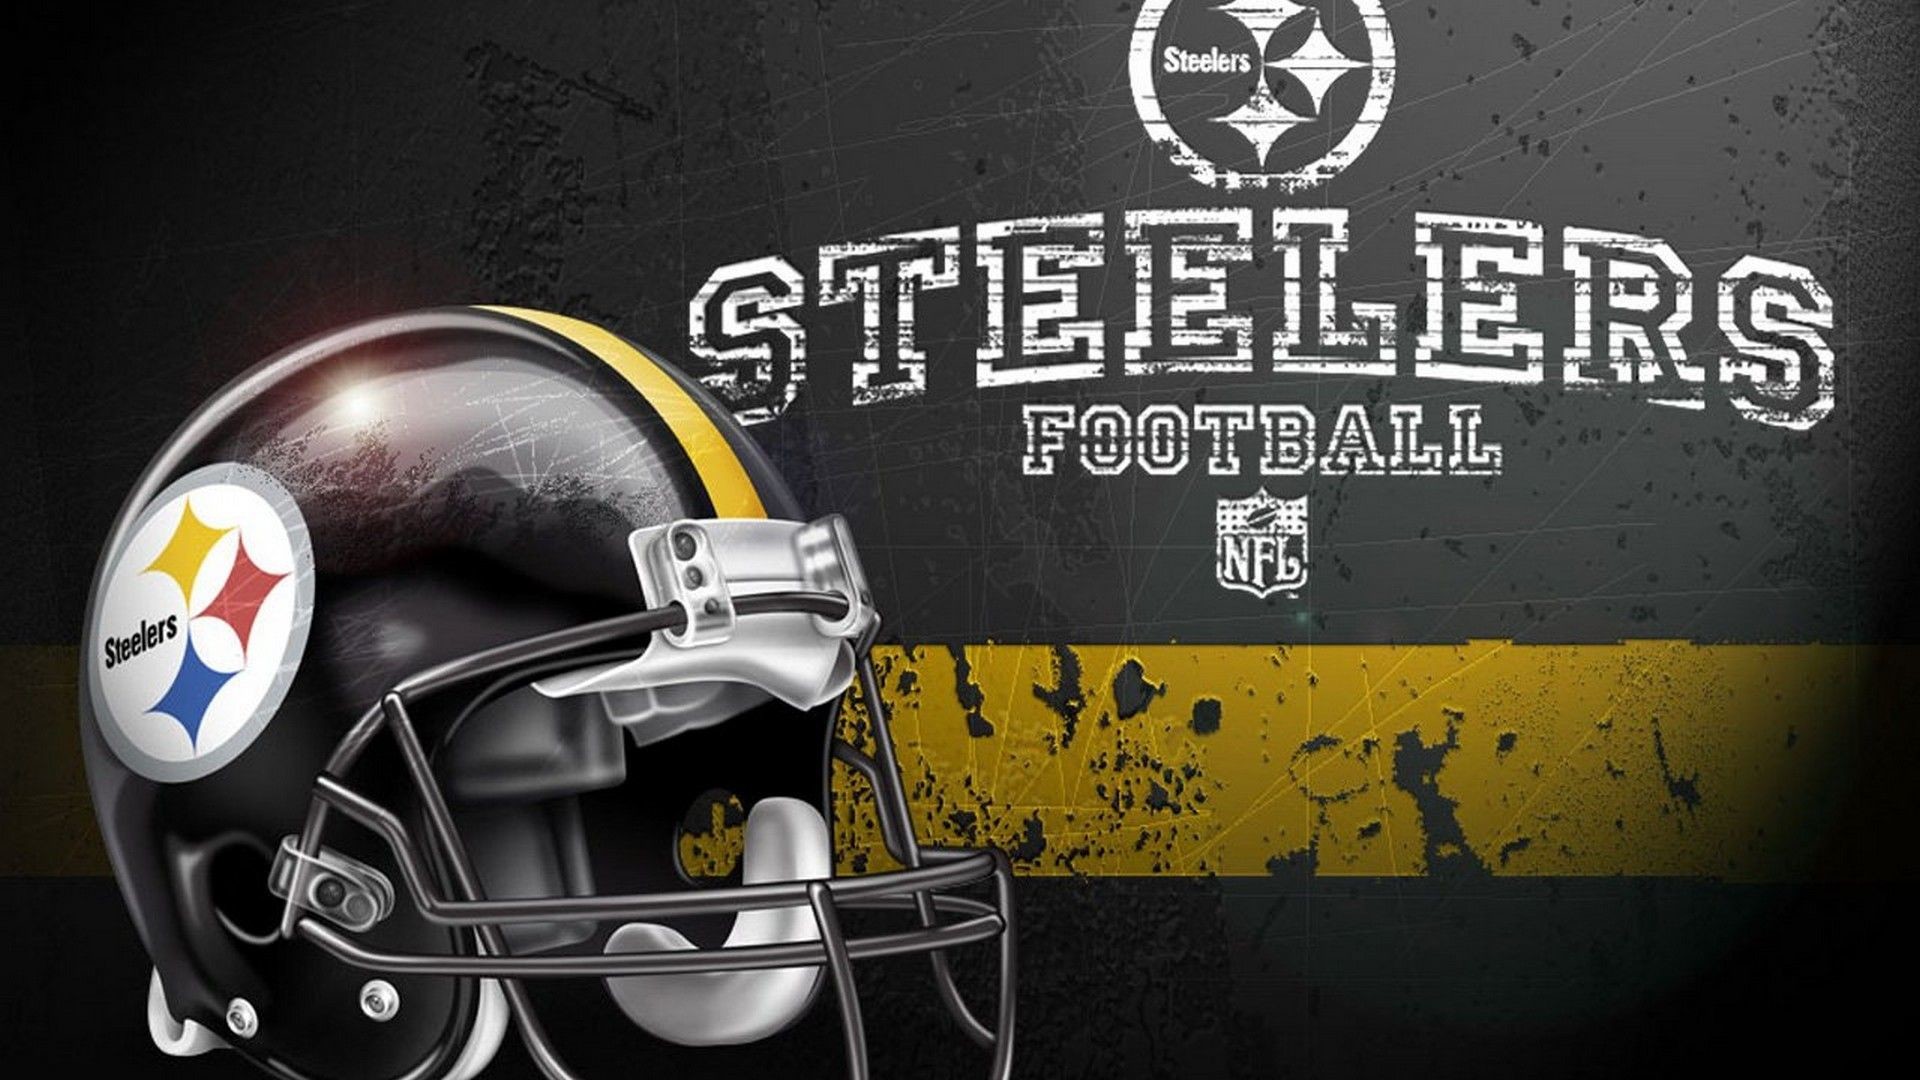 1920x1080 Steelers Wallpaper For Mac Backgrounds | Best NFL Wallpapers